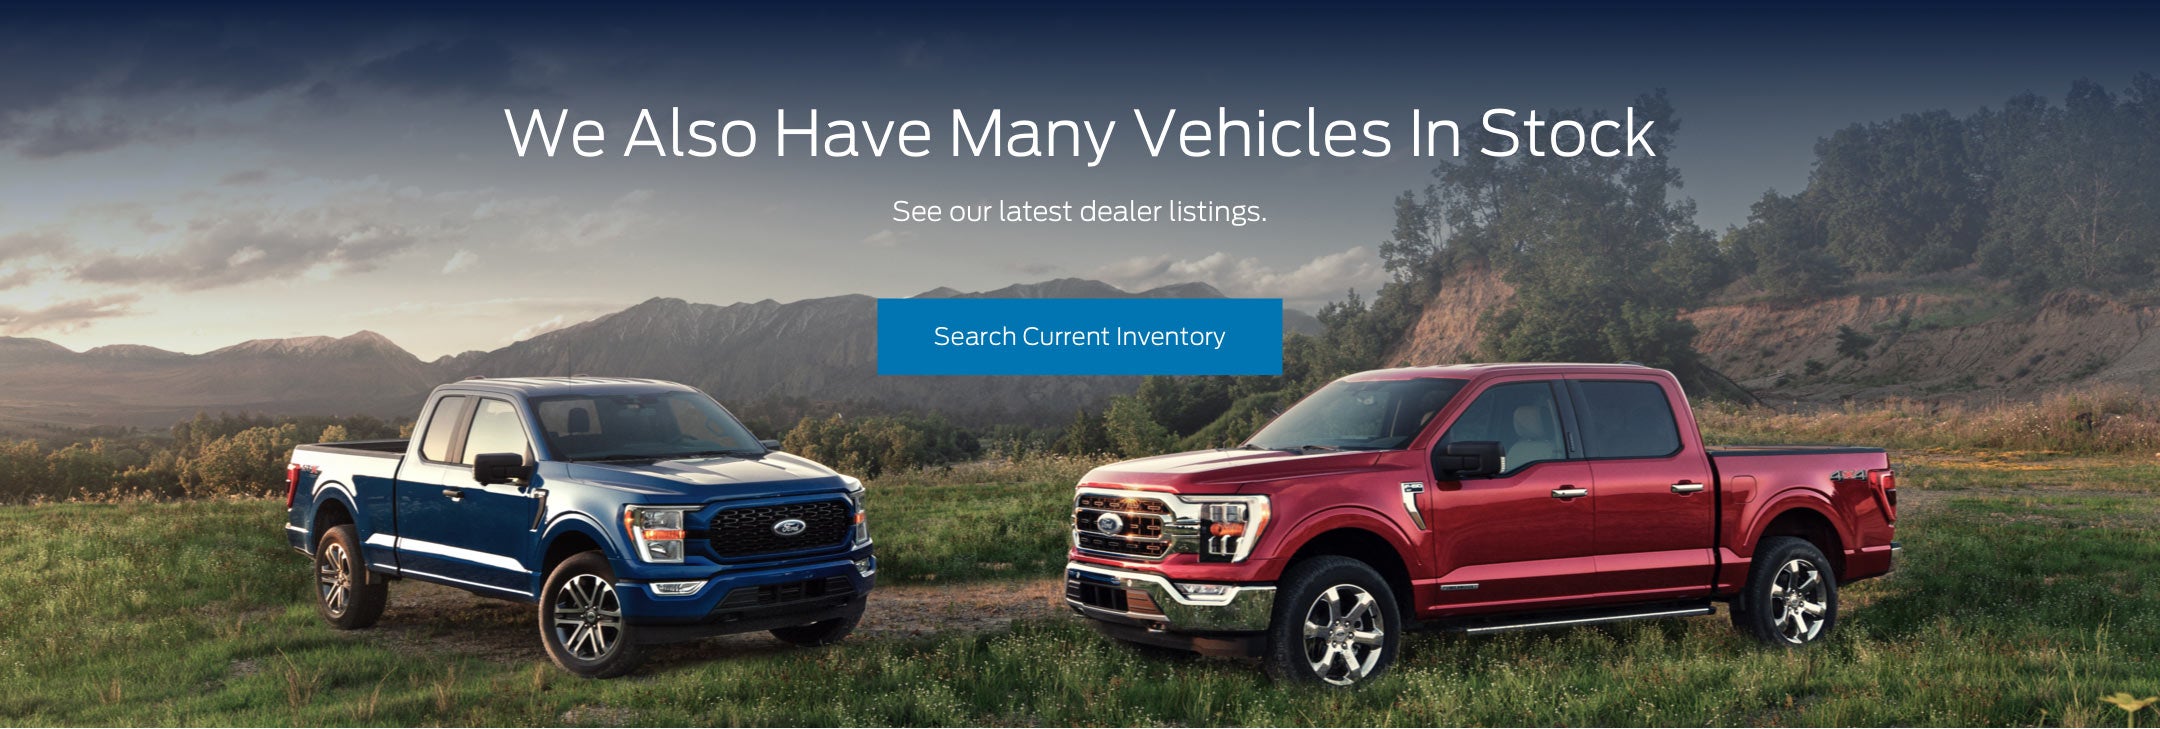 Ford vehicles in stock | Reddick Brown Ford in Morrison TN